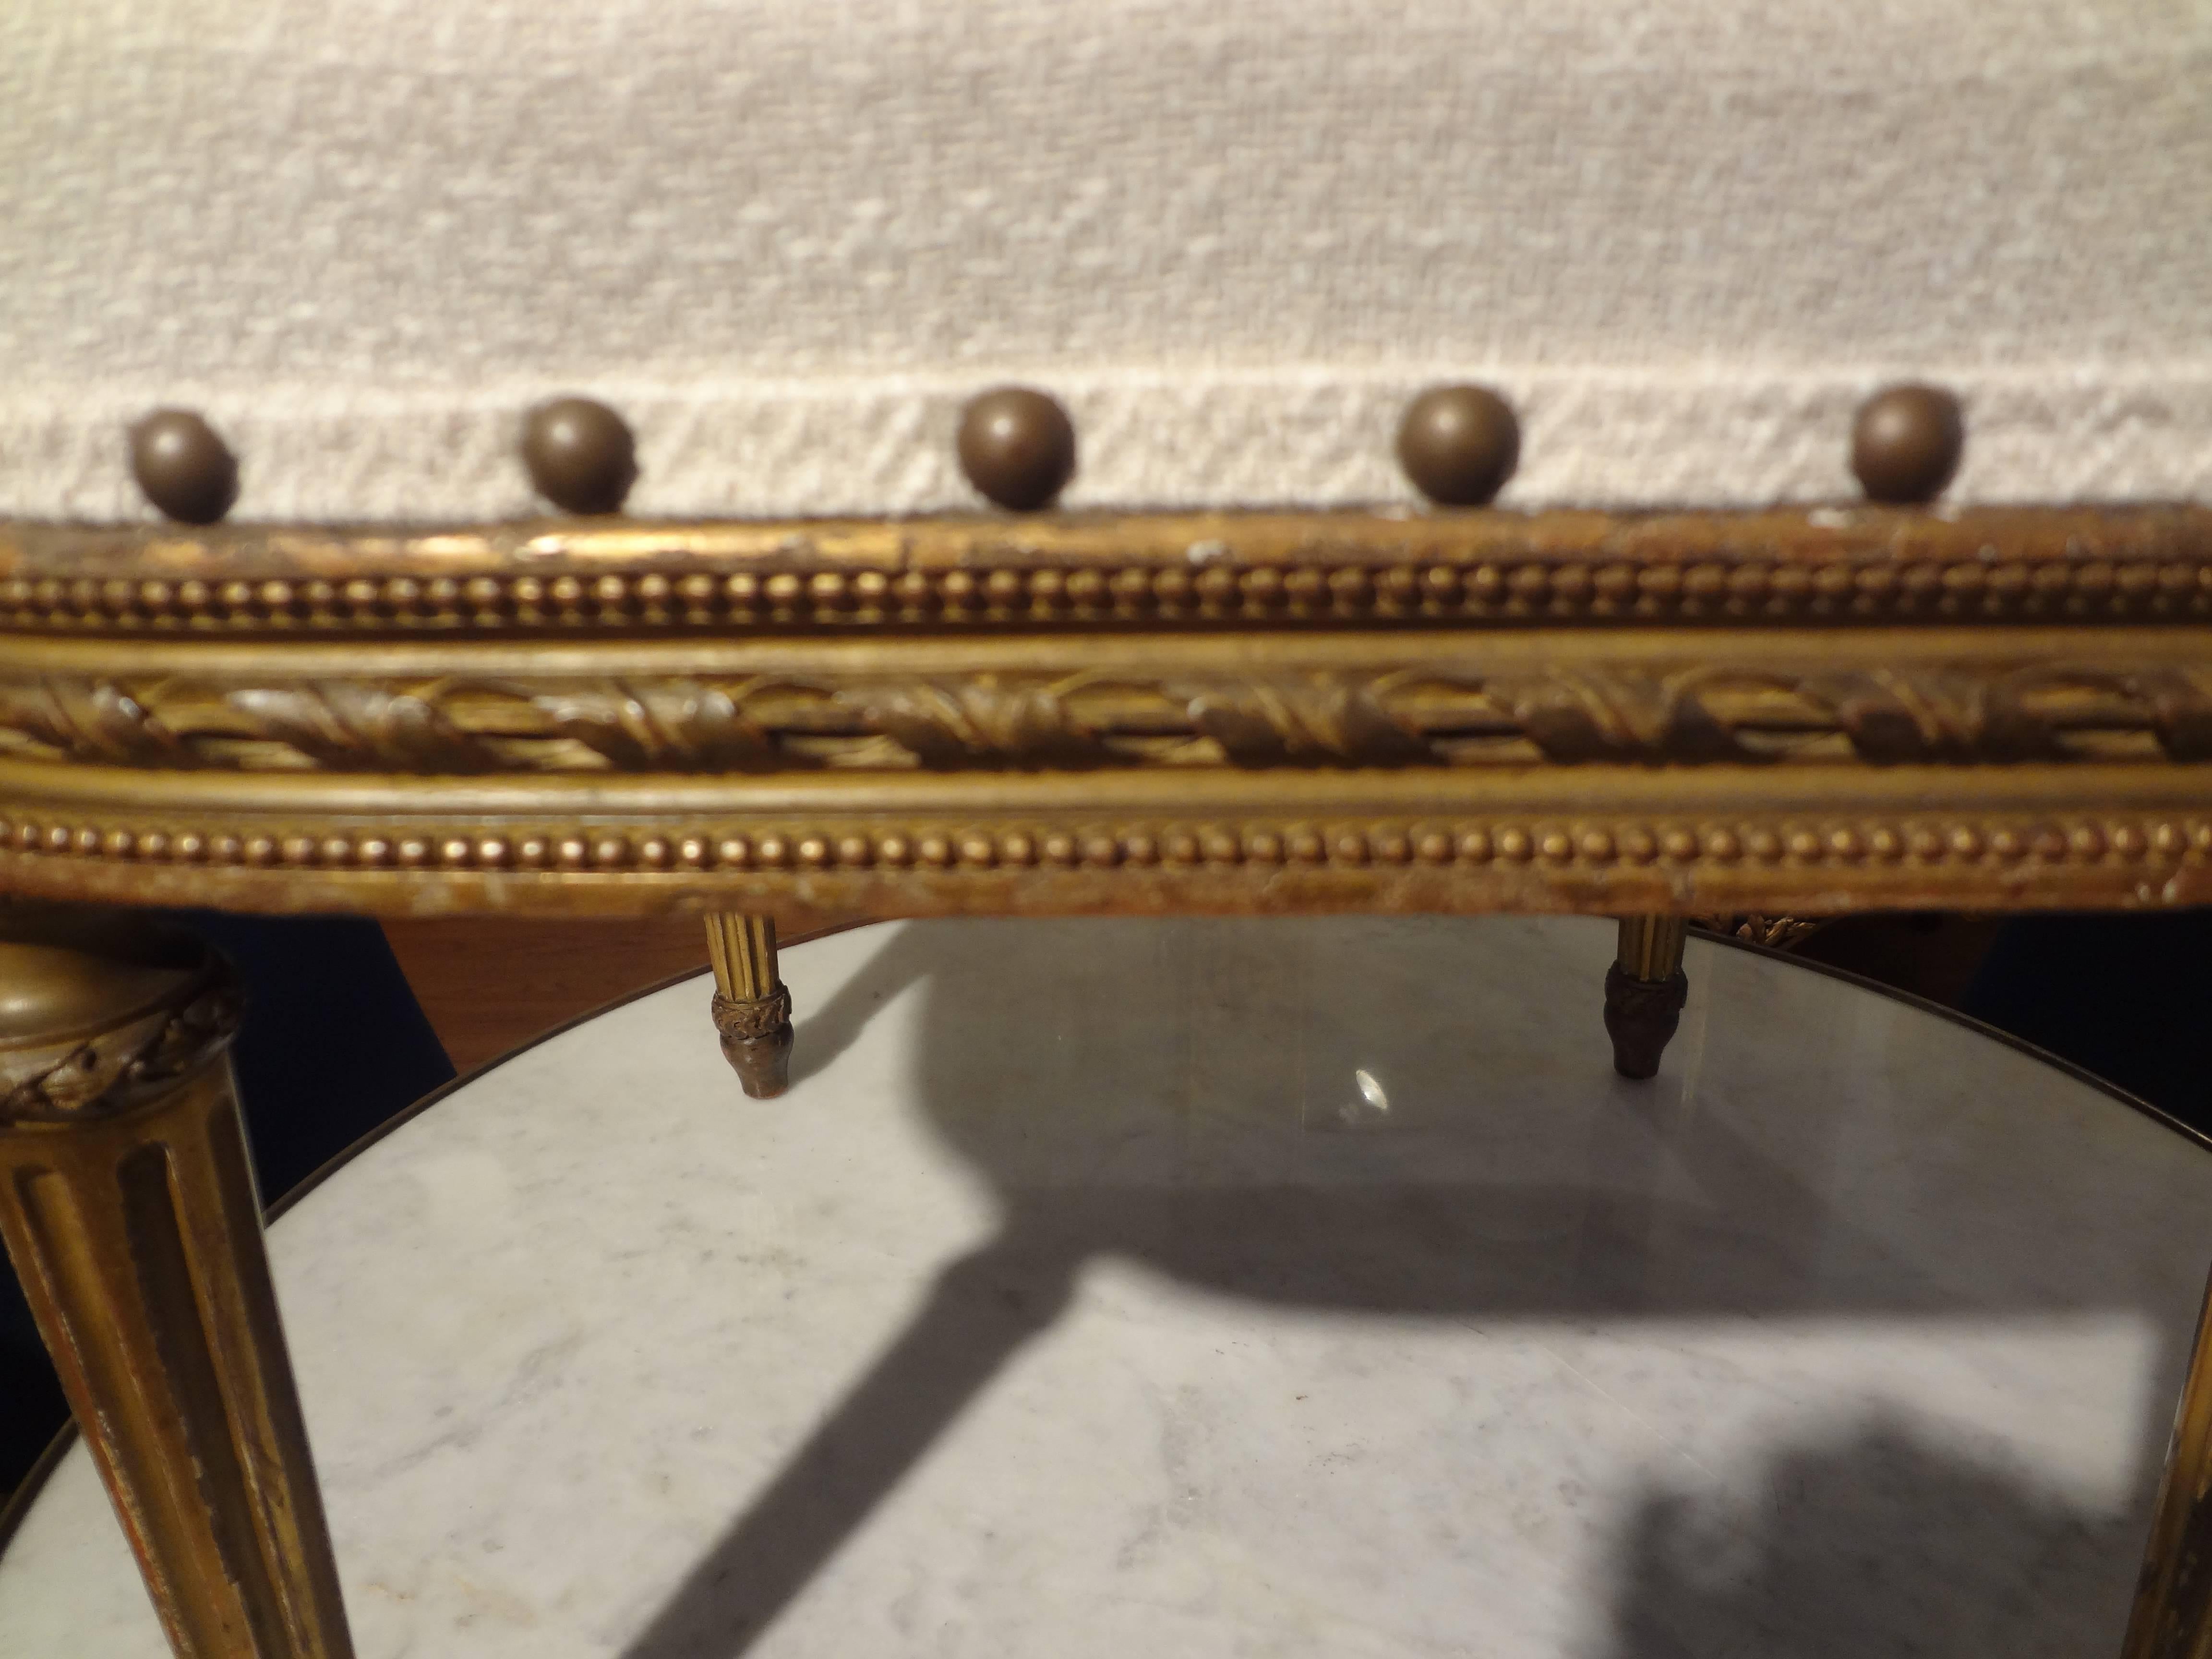 Unusually shaped antique French Louis XVI style giltwood tabouret, stool, ottoman or bench, professionally upholstered in cream colored linen blend with a loose cushion.